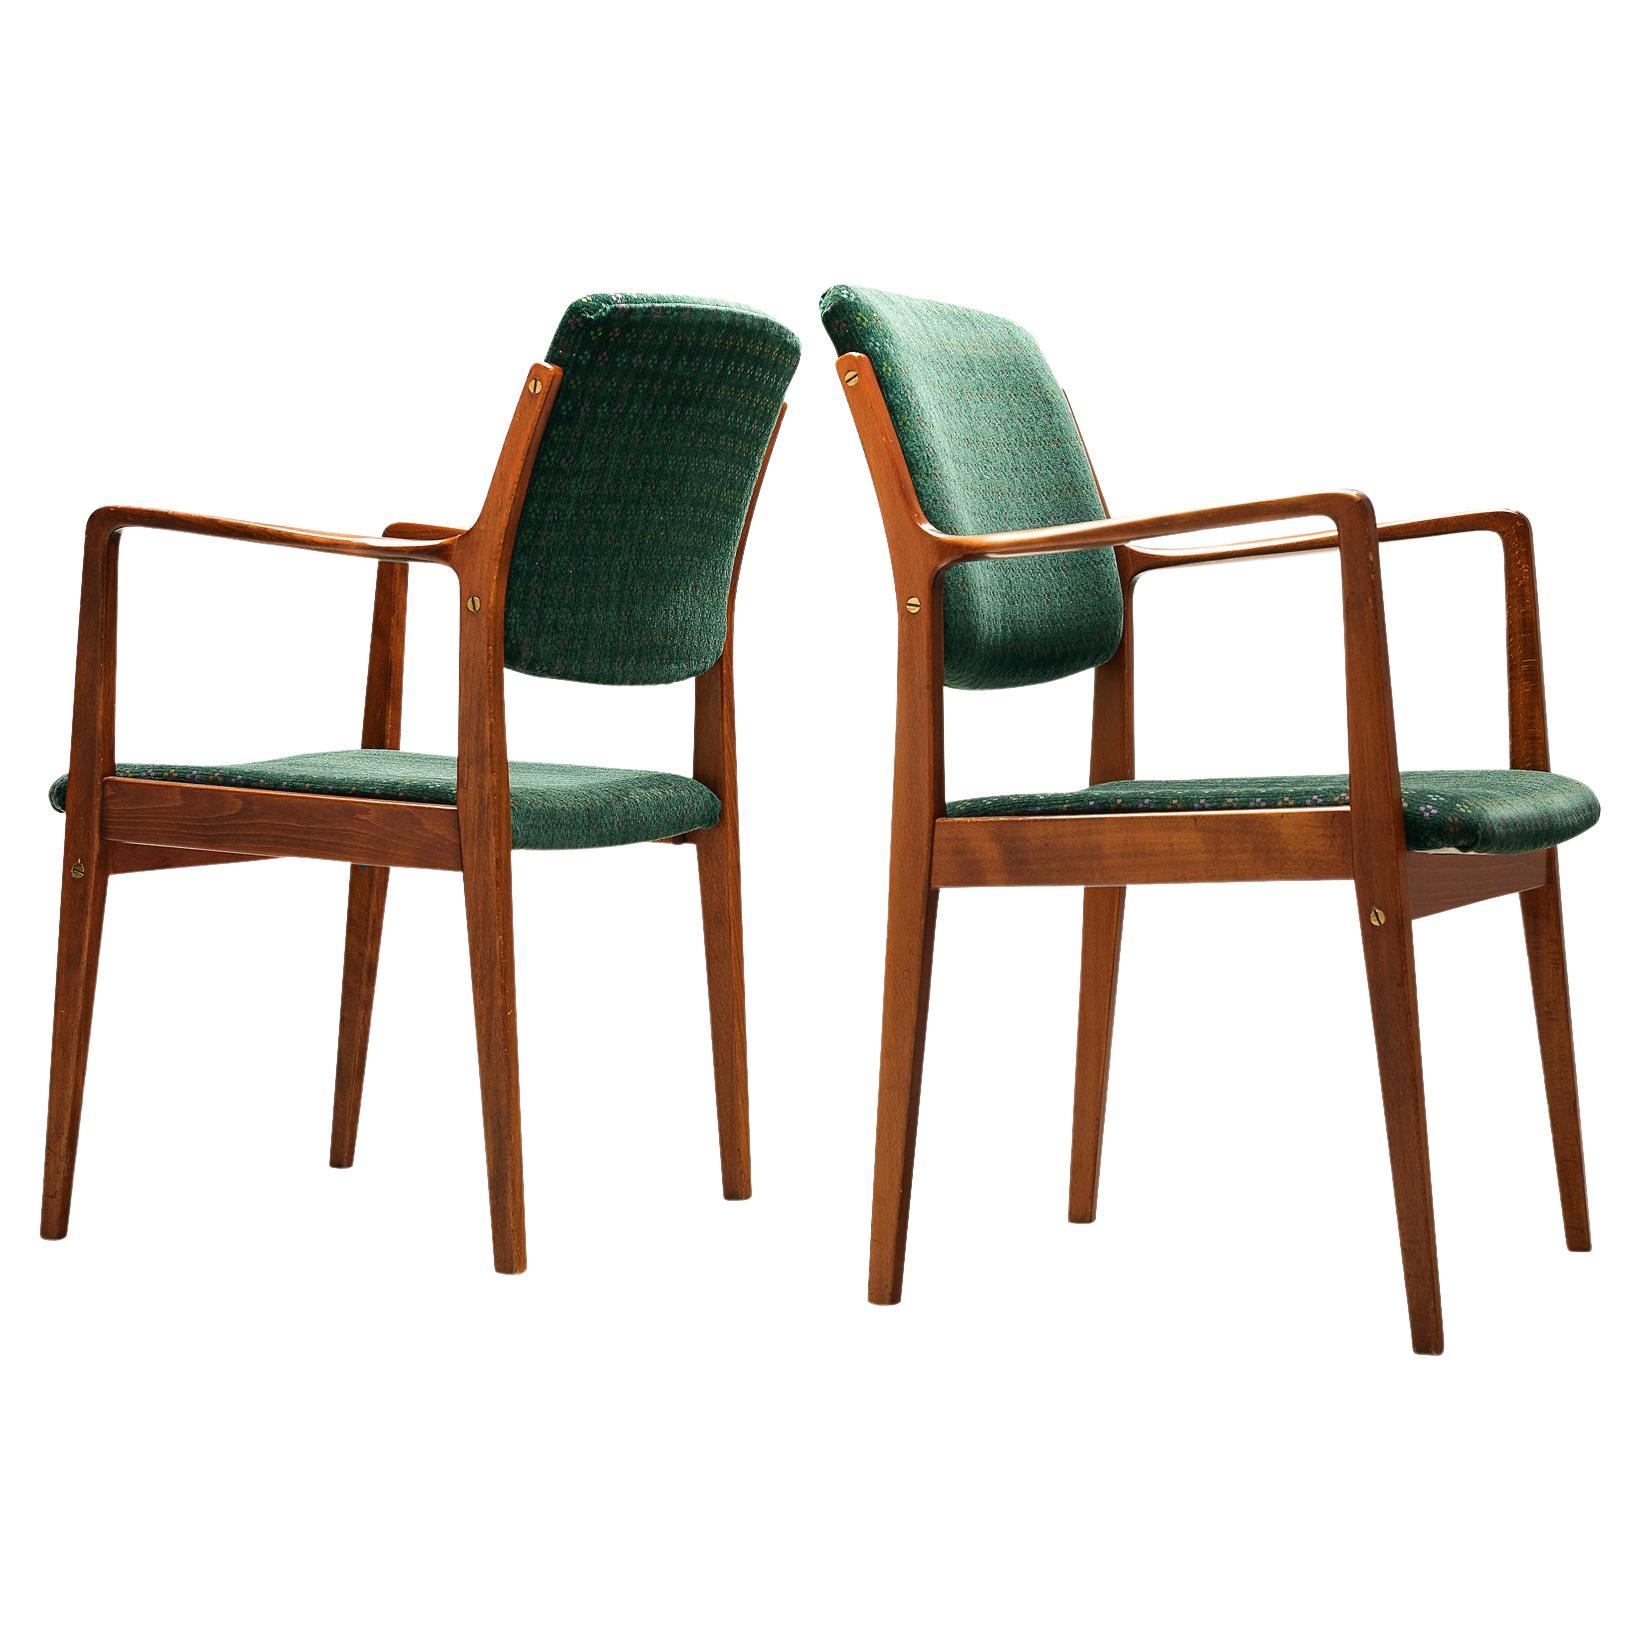 Pair of Swedish Armchairs in Green Upholstery